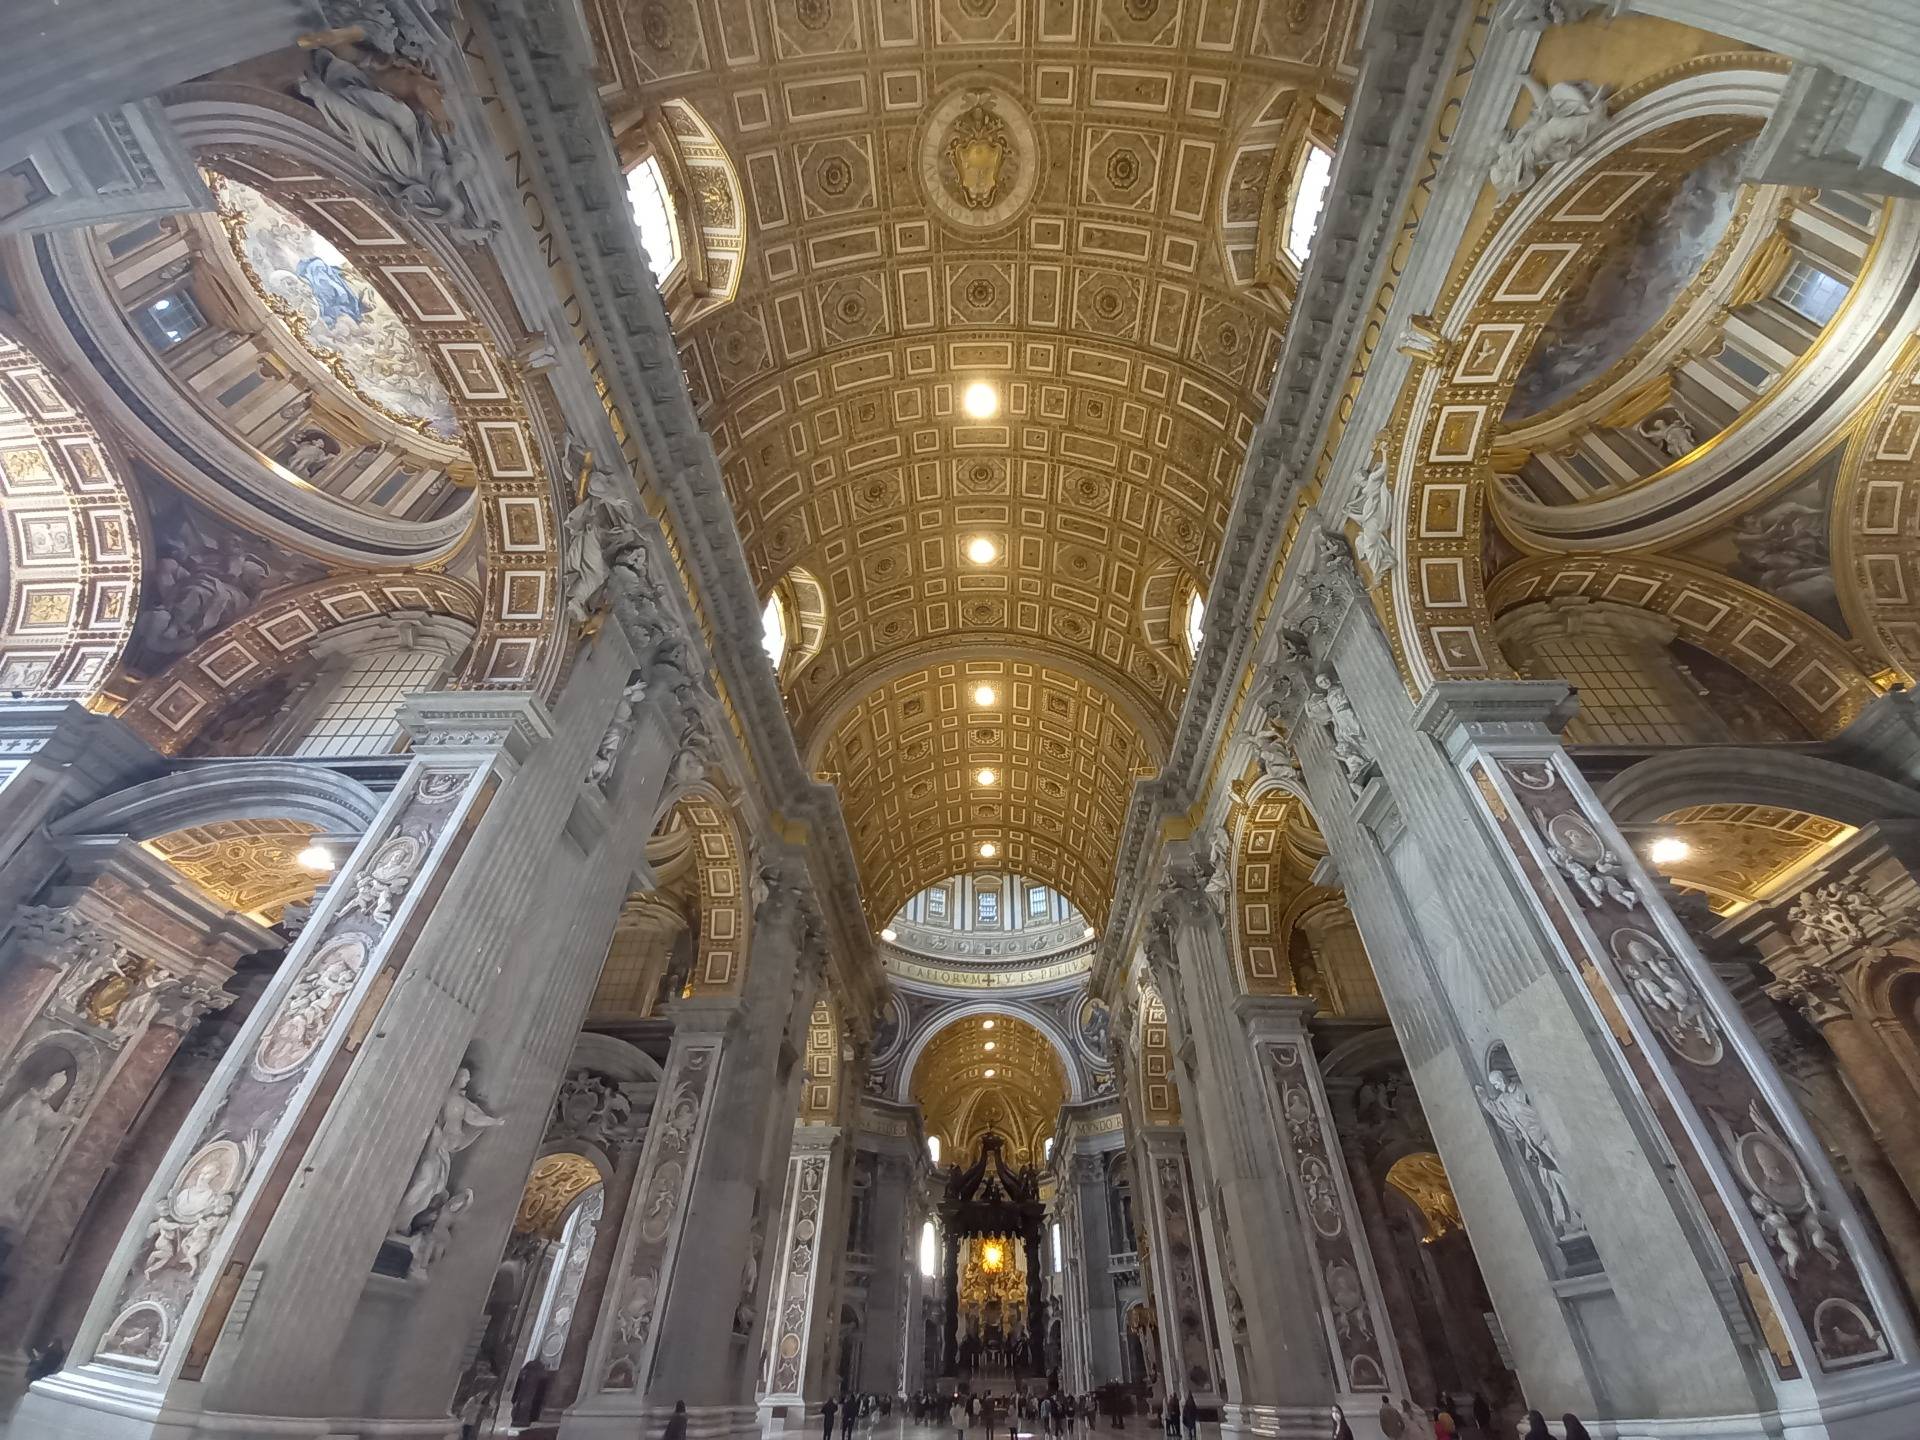 My long weekend in Rome no.2 - St. Peter's Basilica